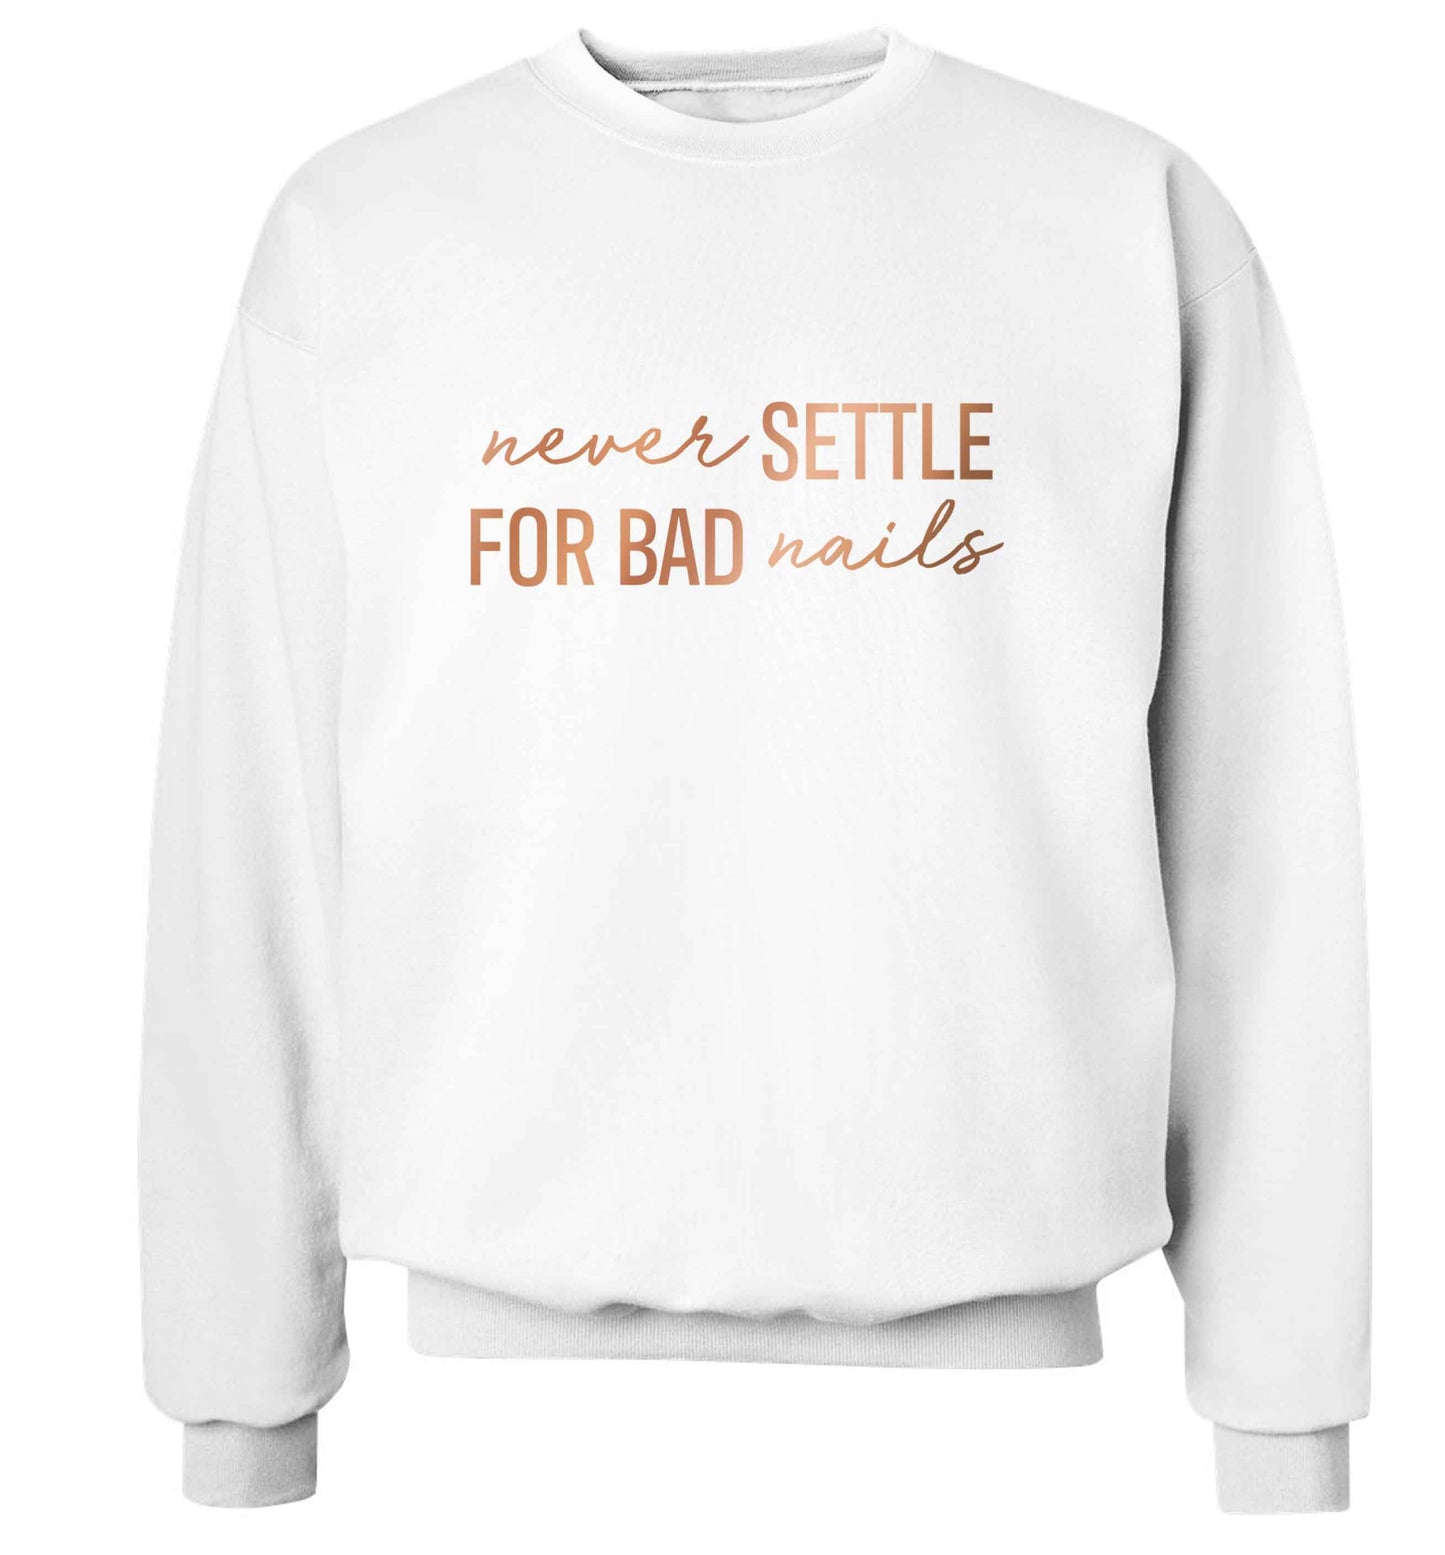 Never settle for bad nails - rose gold adult's unisex white sweater 2XL